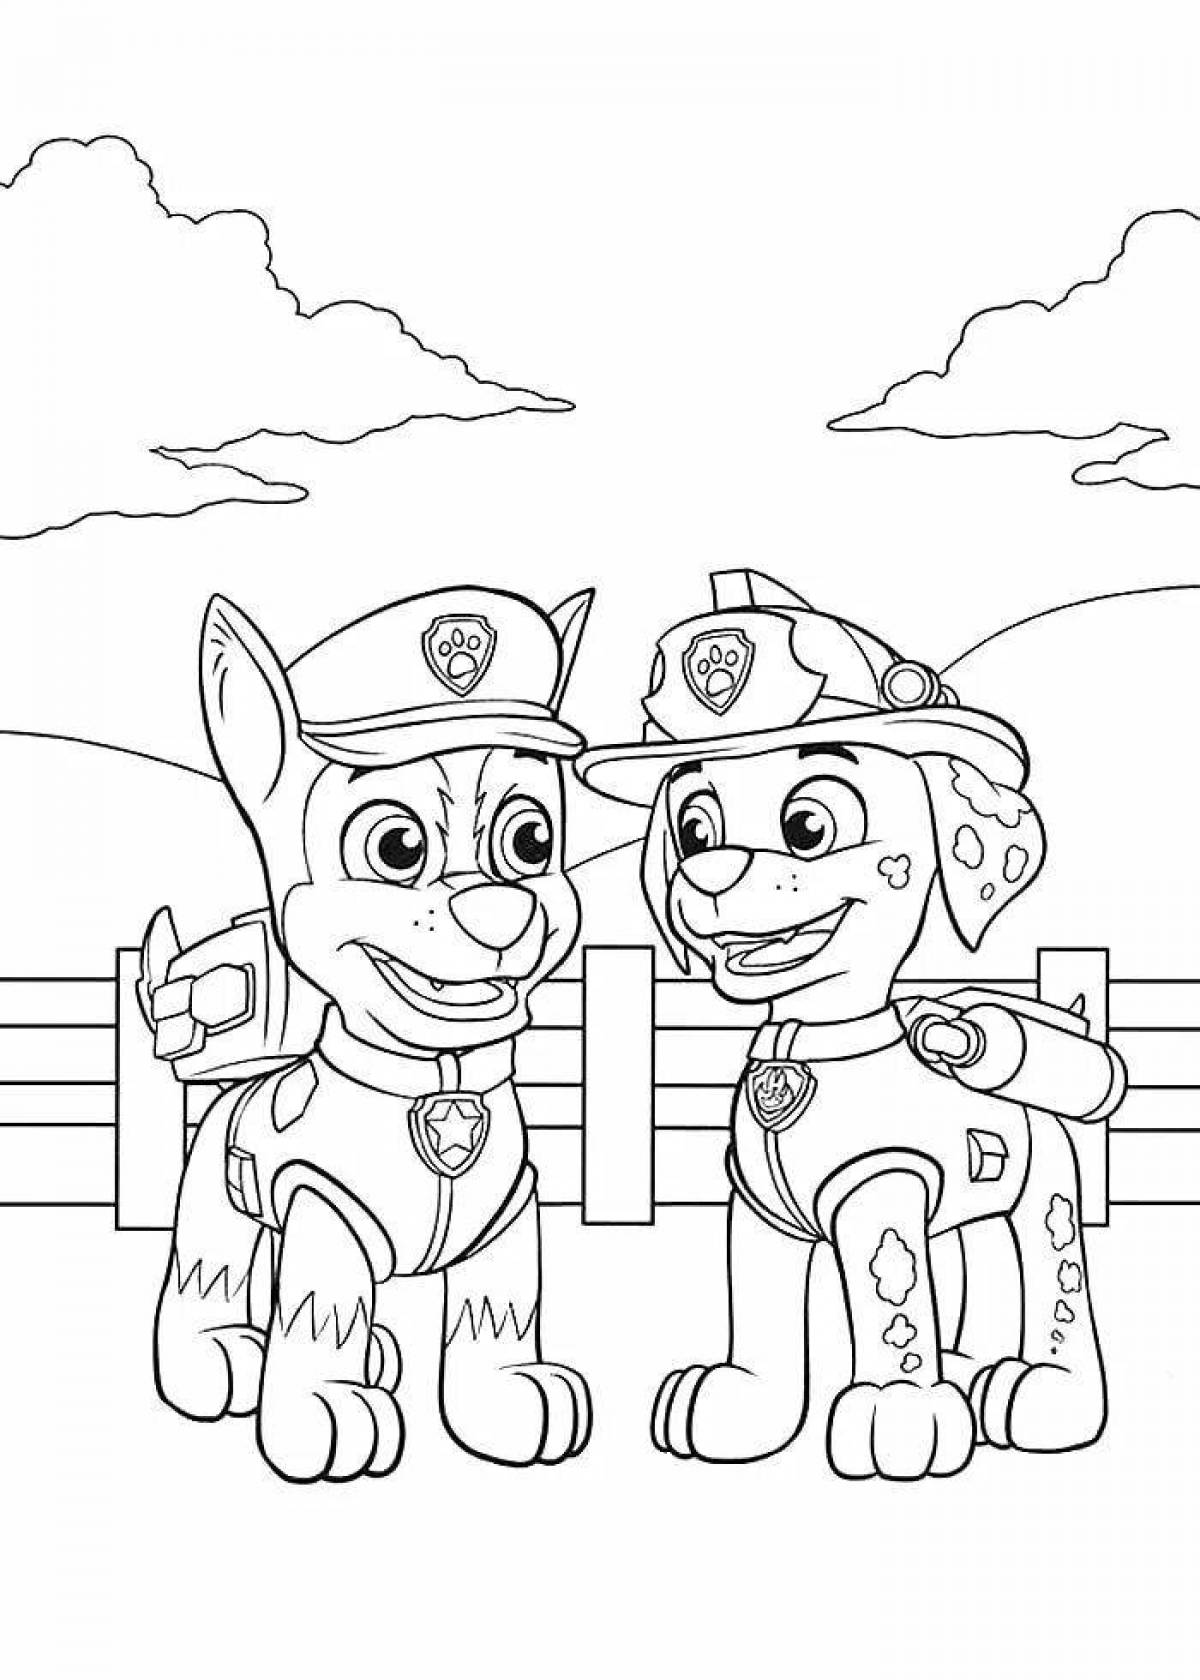 Animated racer coloring page